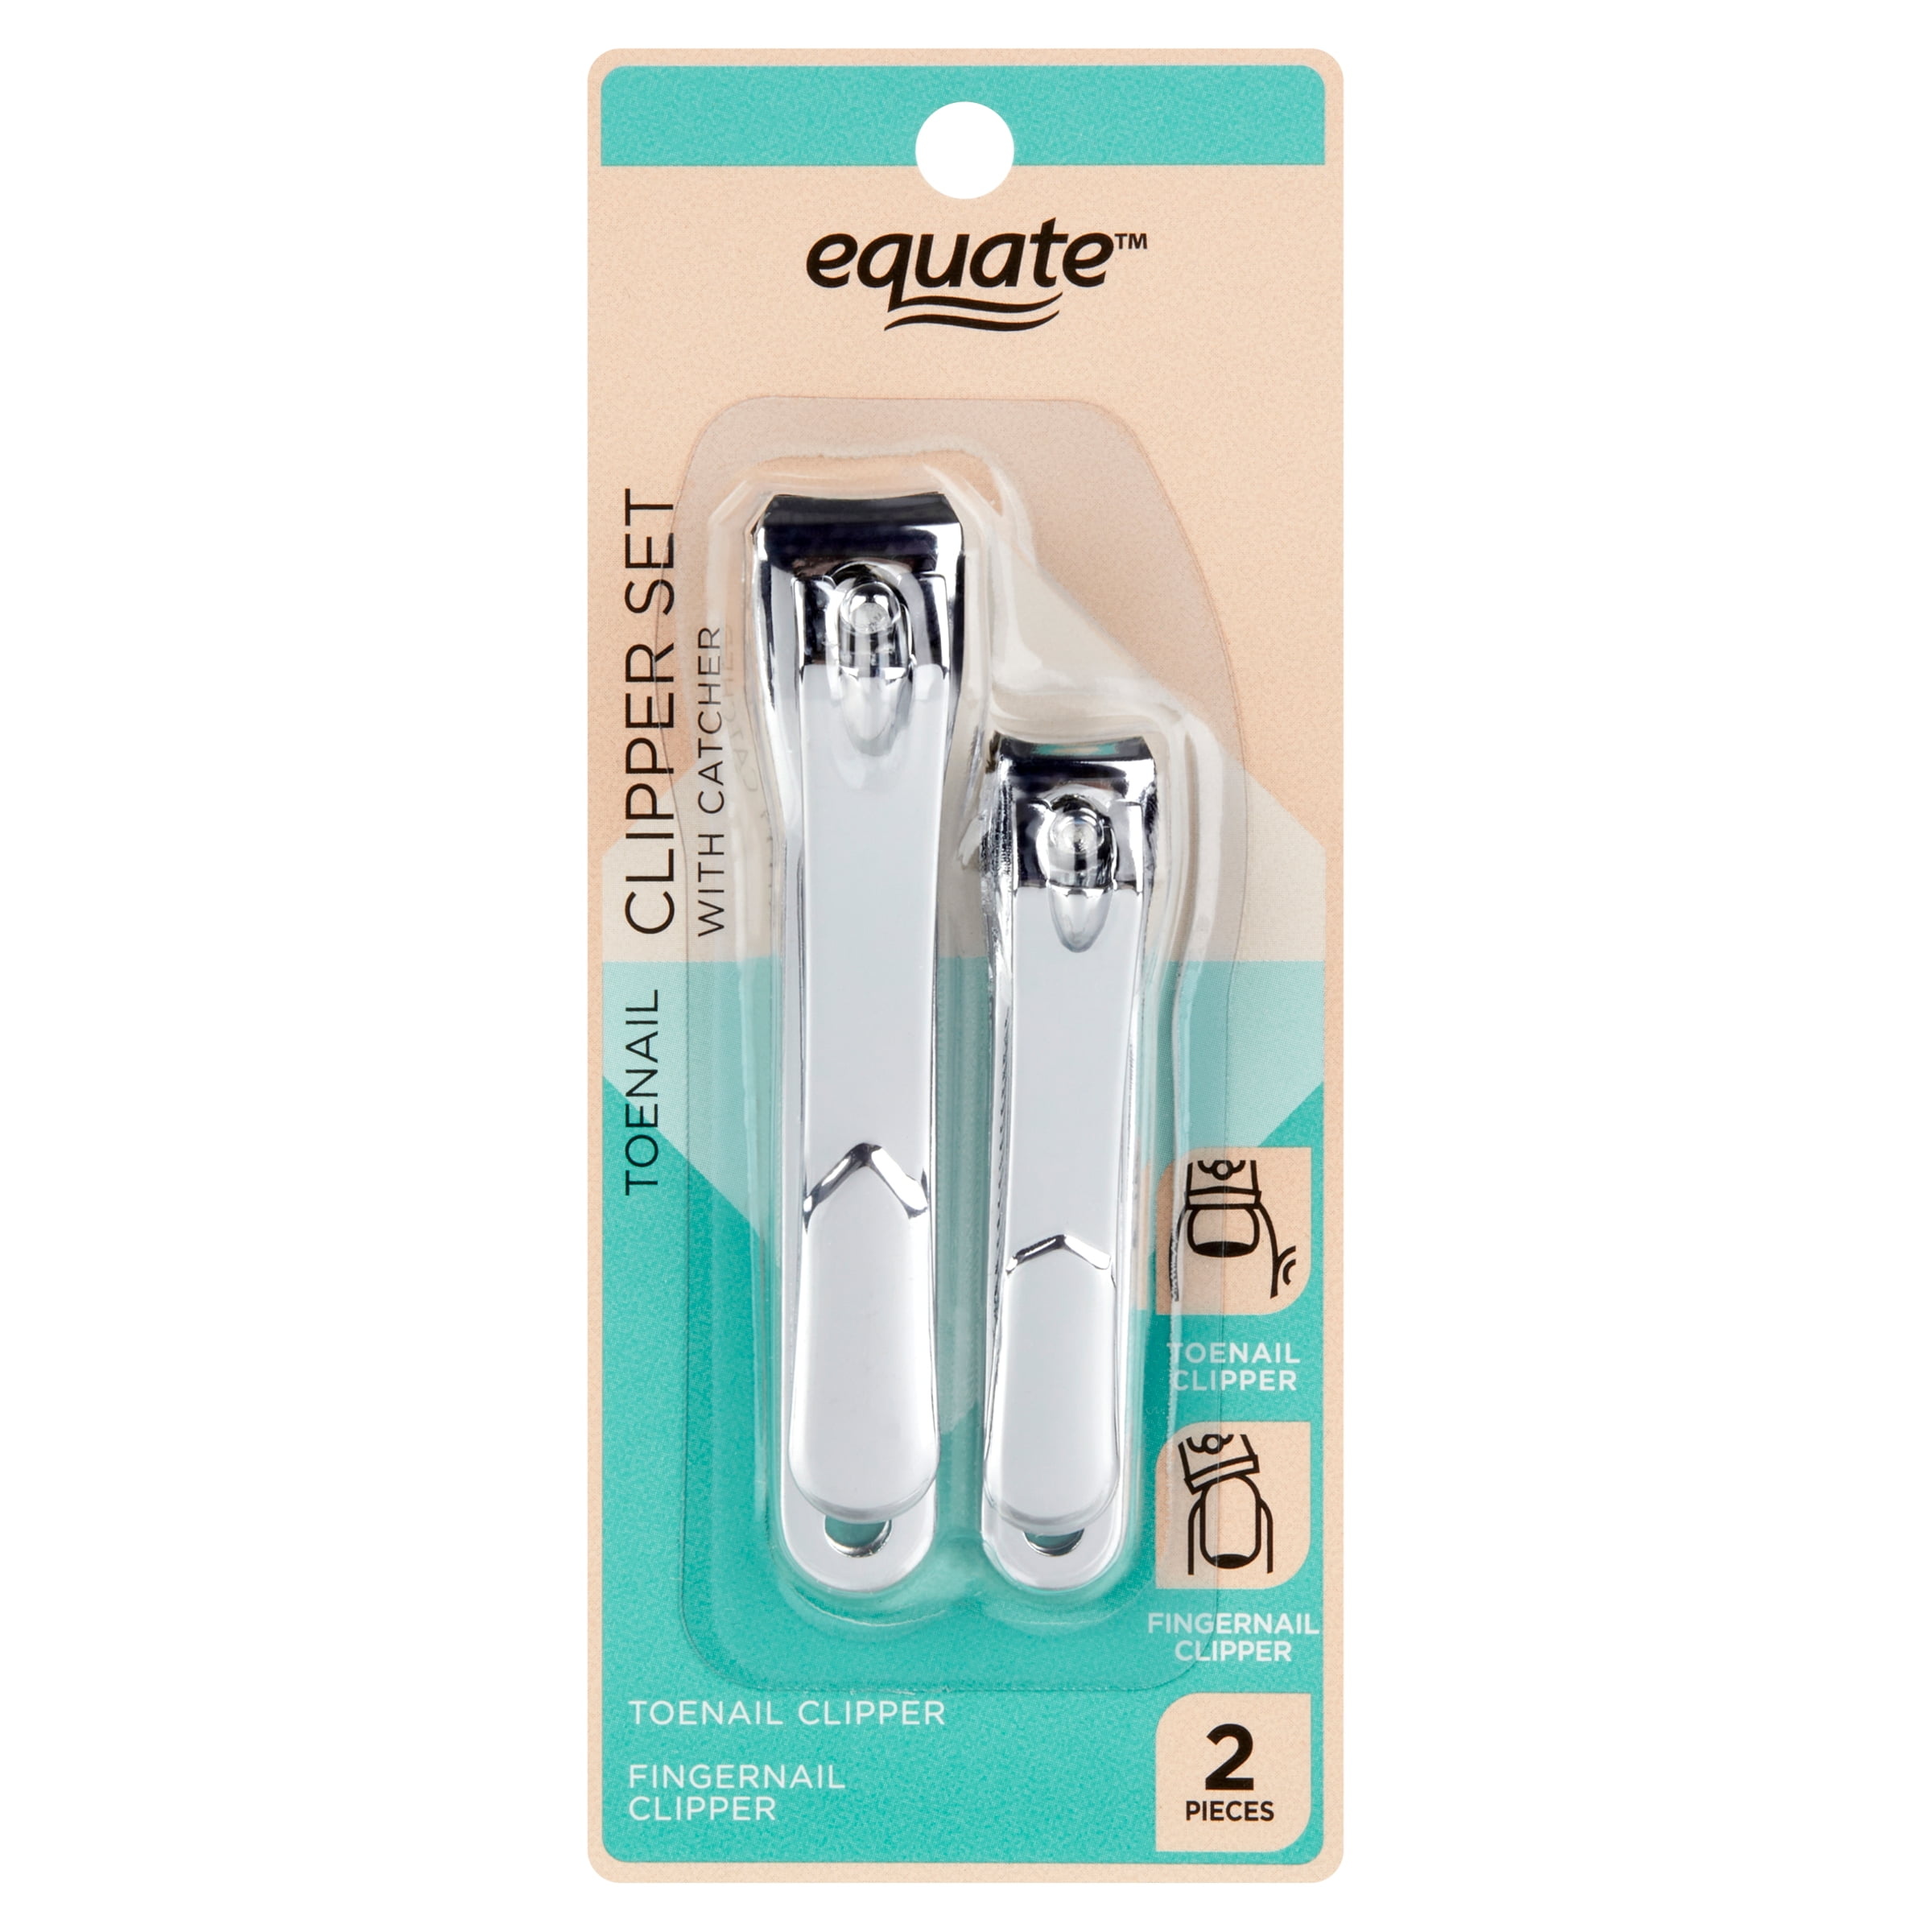 Equate Duo Pack Nail Clippers with Catcher, 2 Pieces, Adult